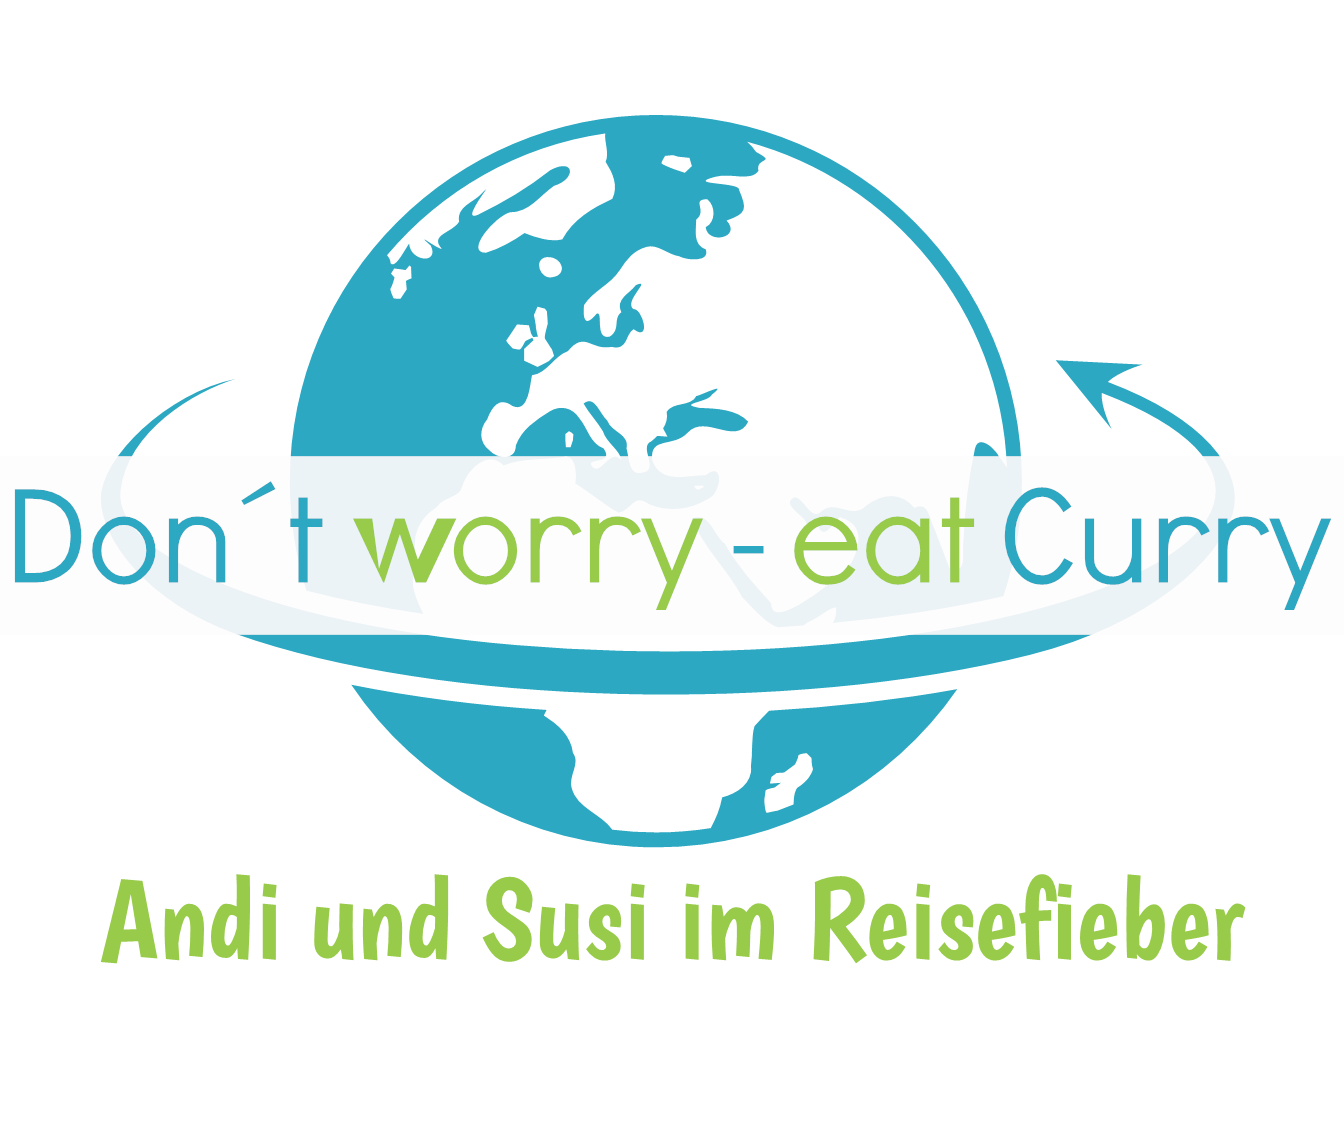 Dont worry – eat Curry